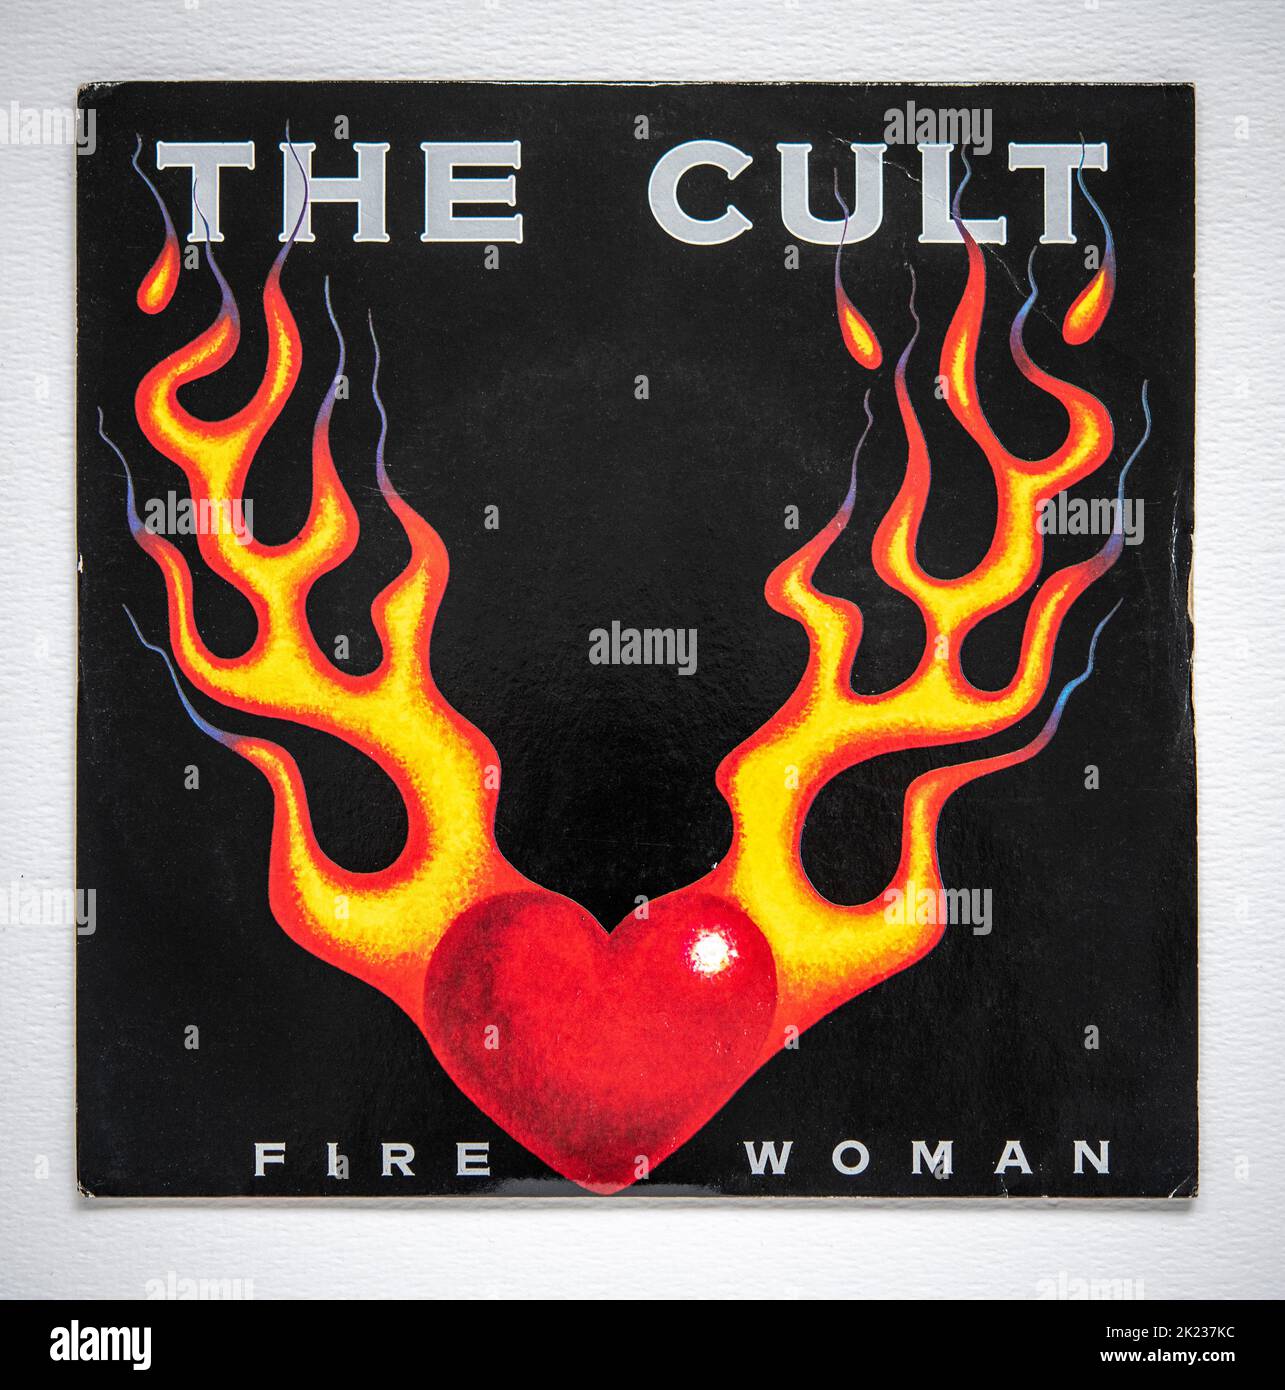 Picture cover of the seven inch single version of Fire Woman by The Cult, which was released in 1989. Stock Photo